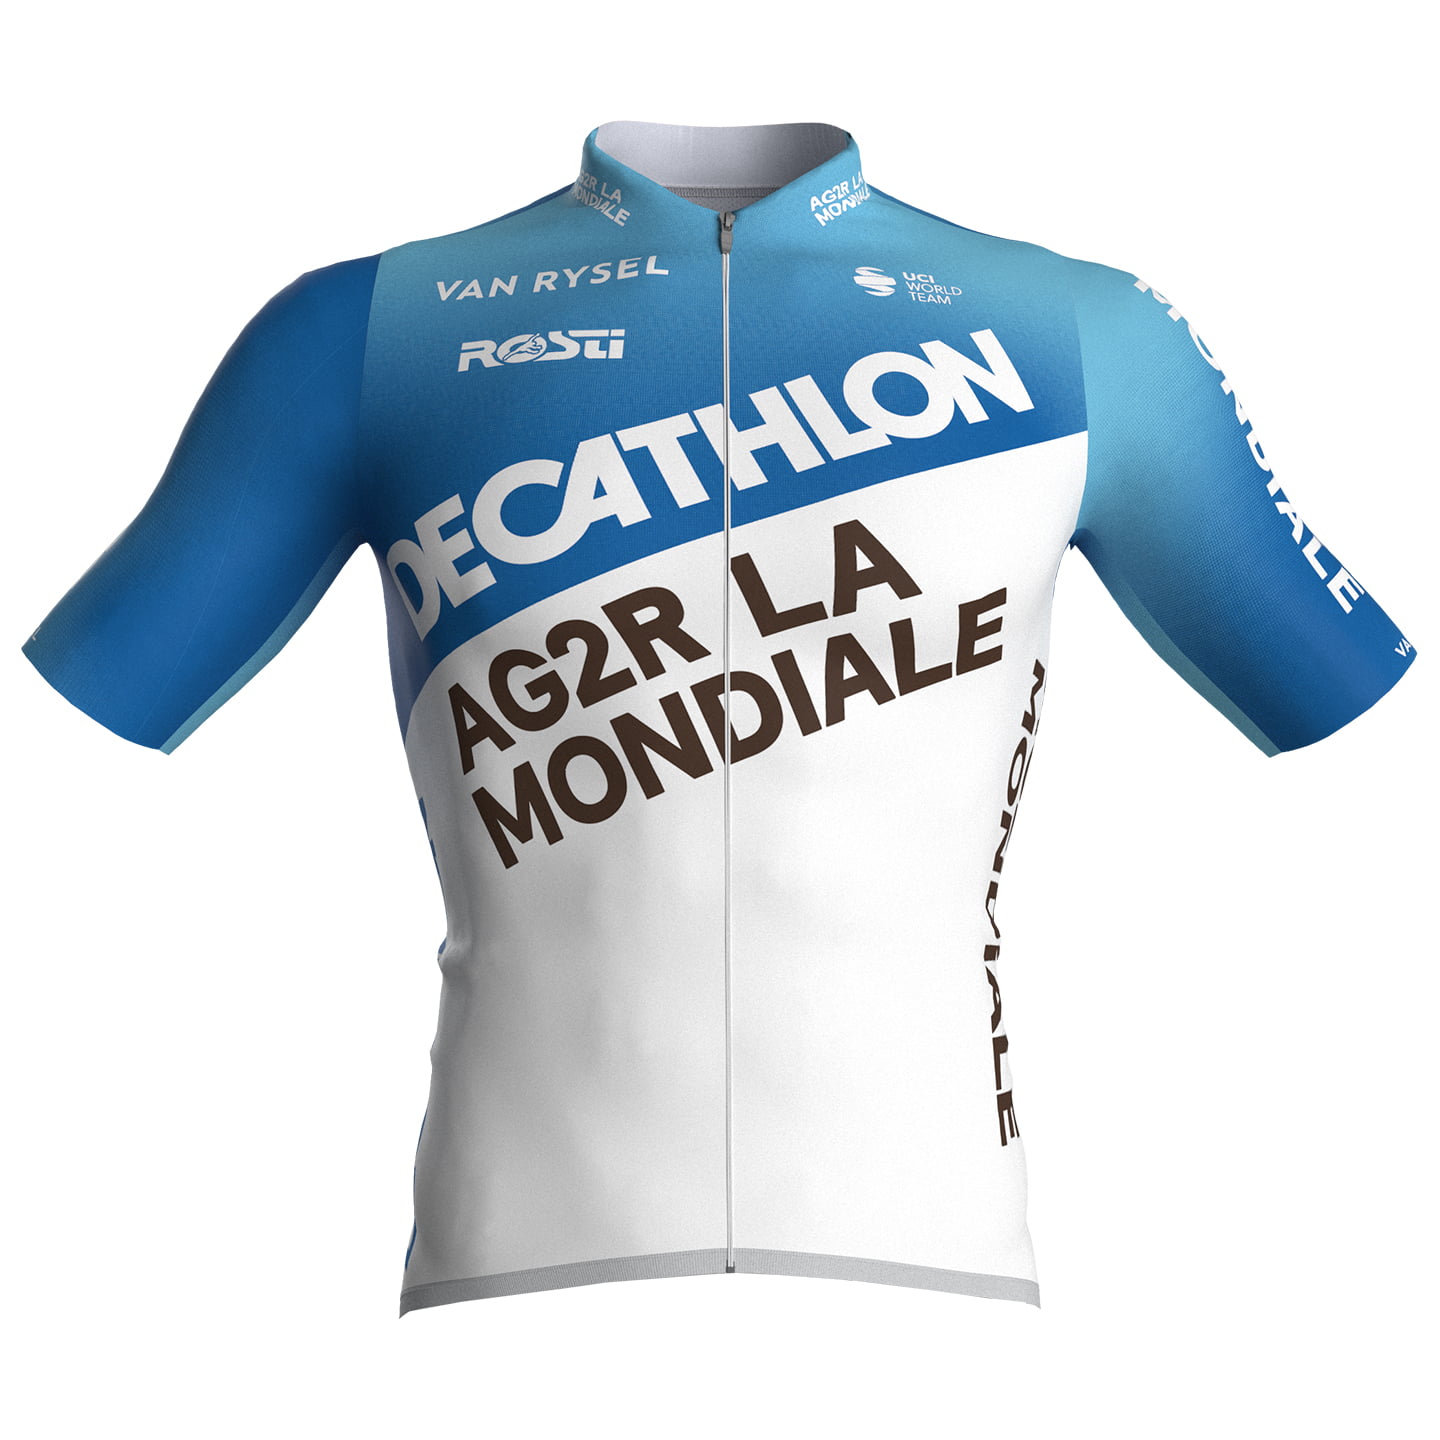 DECATHLON AG2R LA MONDIALE Race 2024 Short Sleeve Jersey Short Sleeve Jersey, for men, size L, Cycling shirt, Cycle clothing